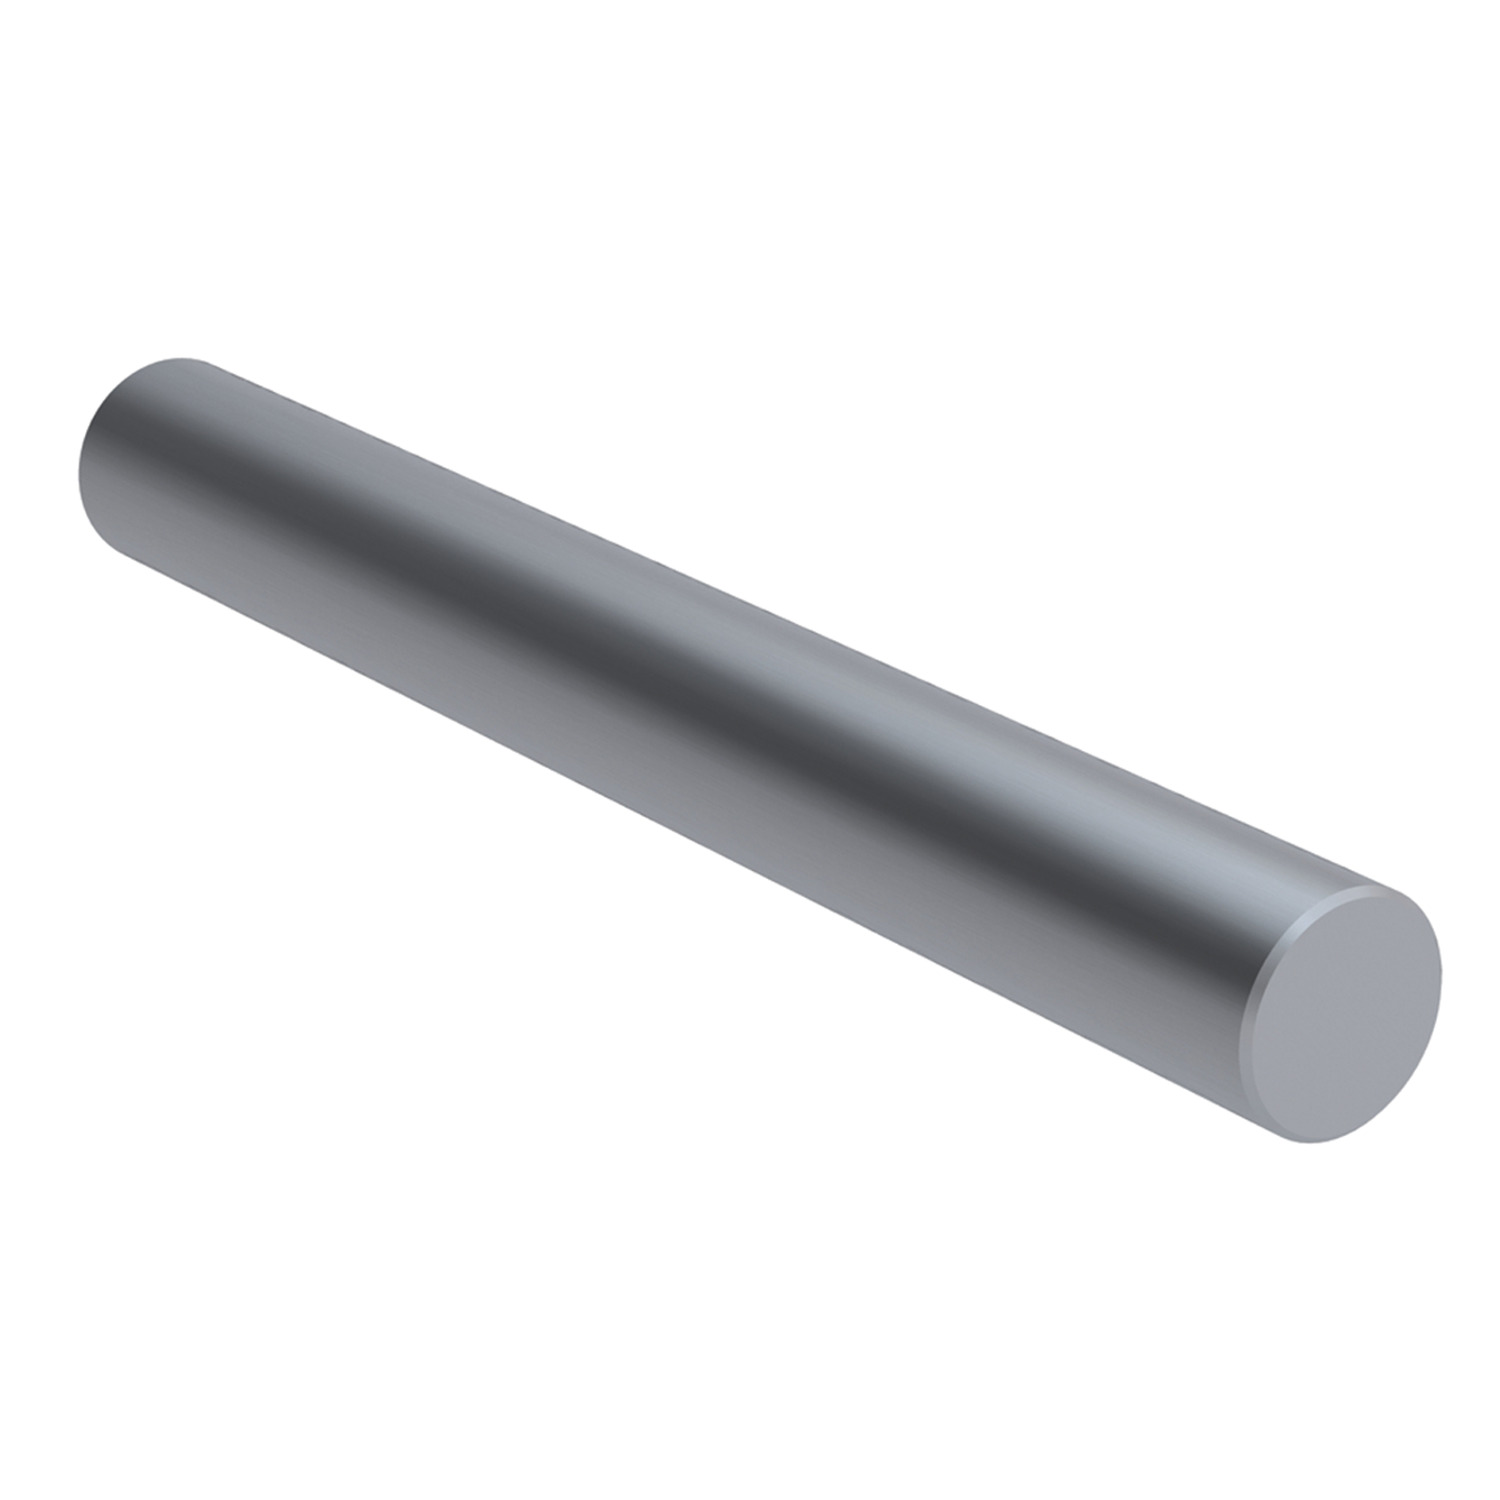 Hard Stainless Linear Shafts Hard Stainless Shaft - L1772 - corrosion resistant hardened stainless steel 440C.